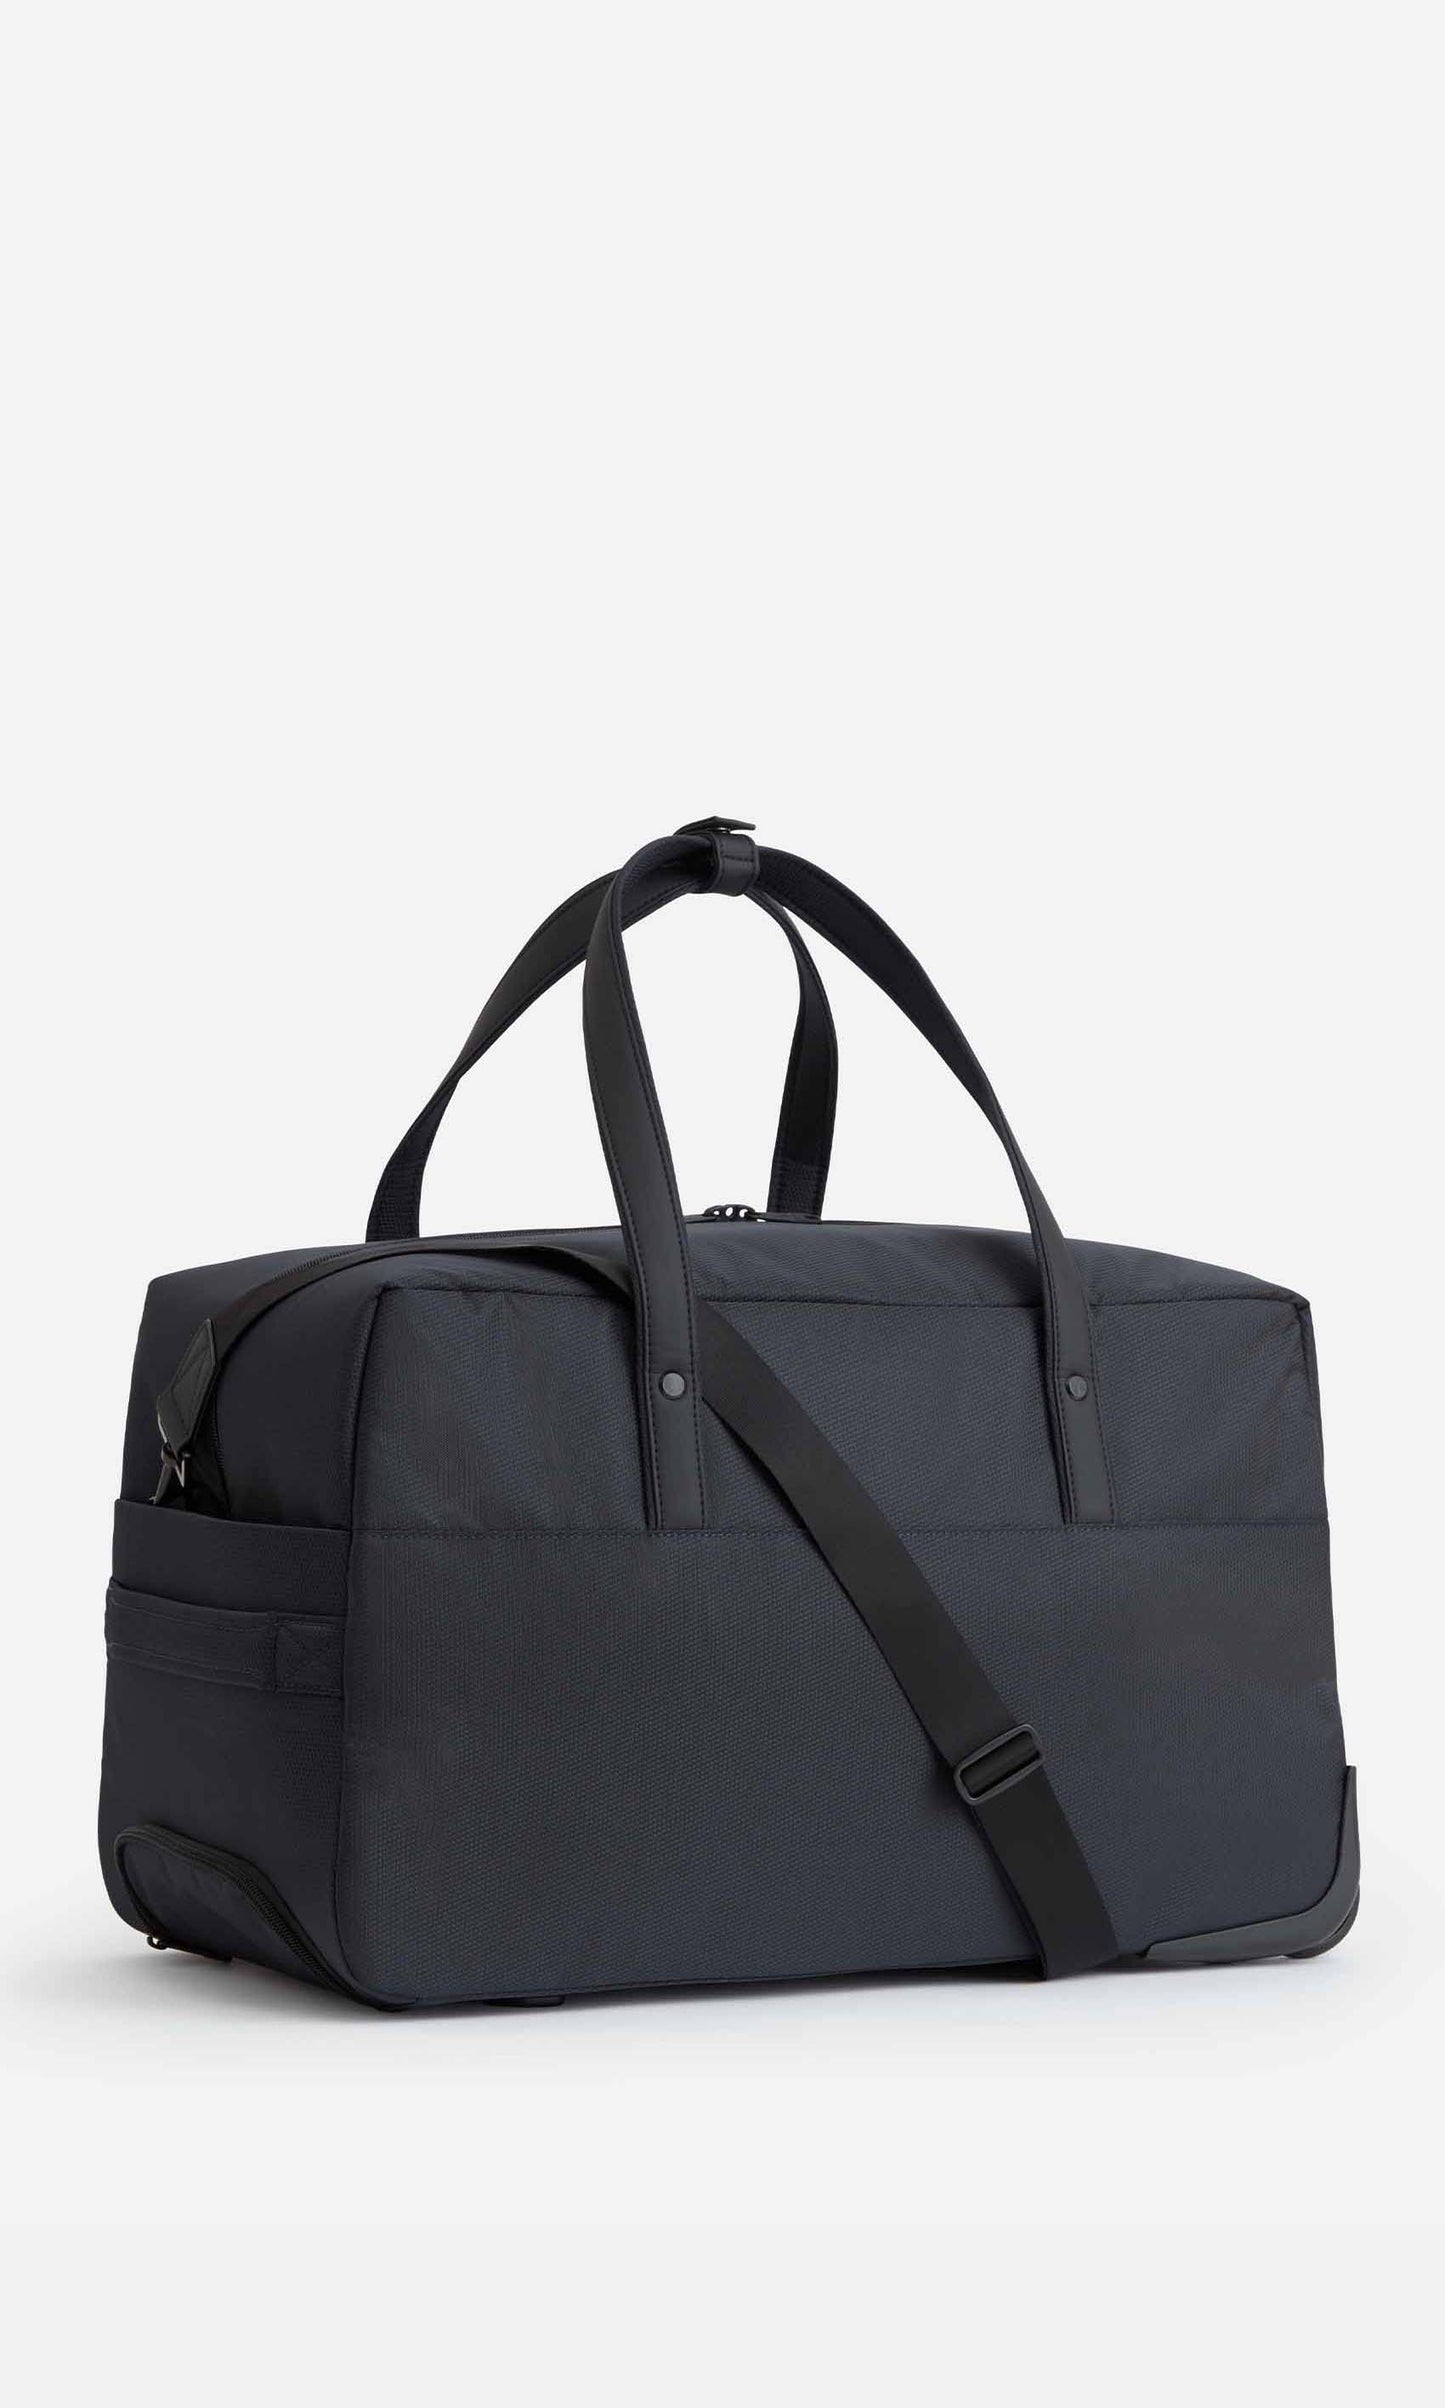 Antler Luggage -  Prestwick wheeled holdall in black - Trolley Bags Prestwick Wheeled Holdall Black | Travel & Lifestyle Bags | Antler 